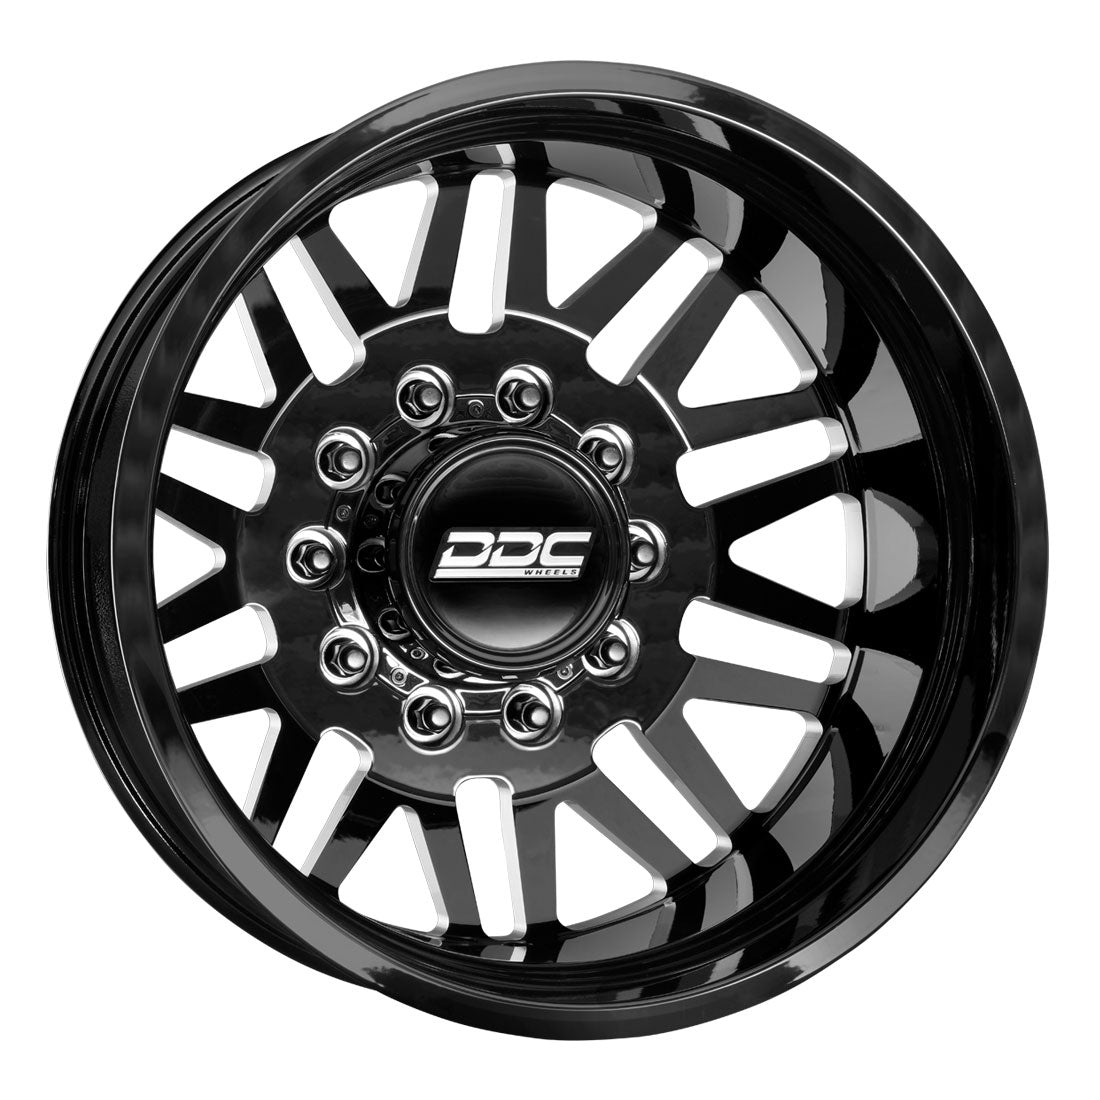 Aftermath Black Milled Super Single Recon Grappler A/T 285/55R22 (34.37 x 11.69)